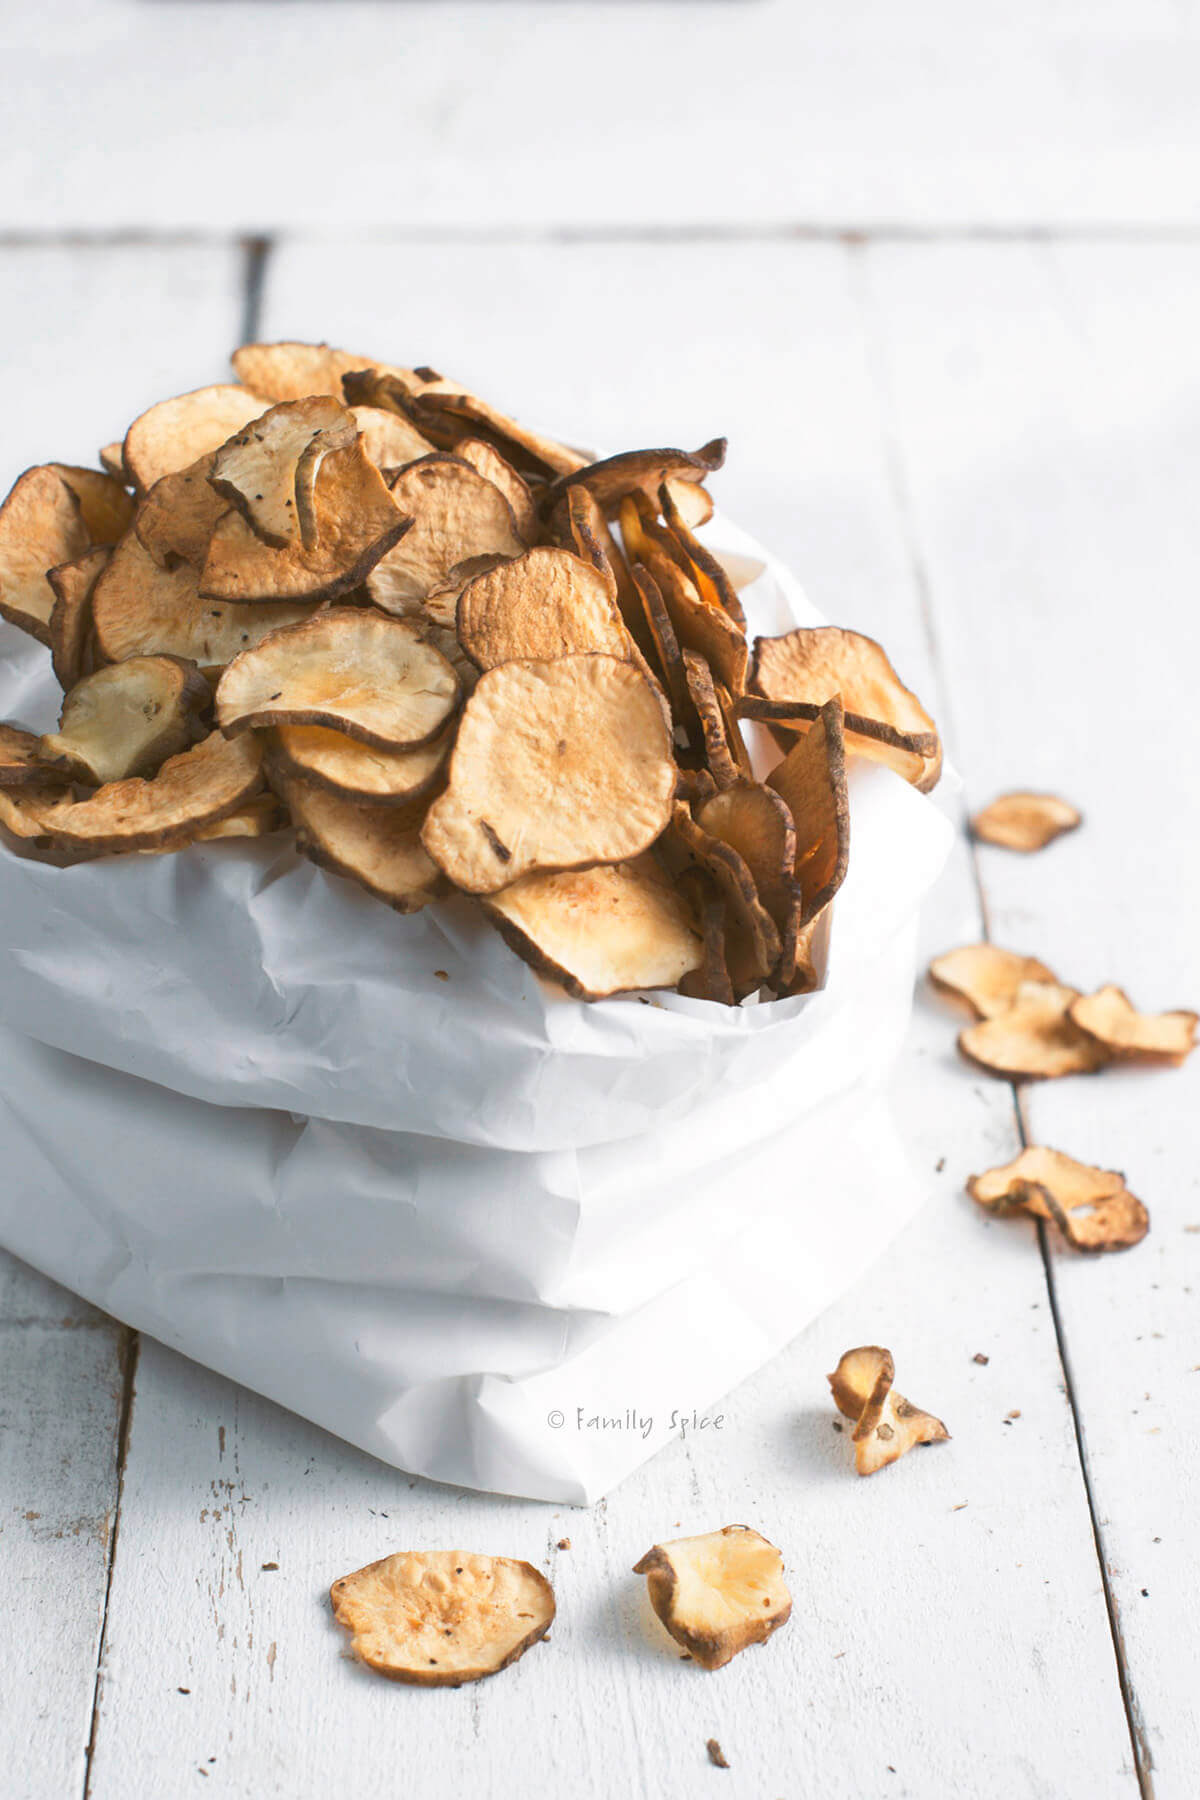 Side view of a white paper bag filled with baked jerusalem artichoke (sunchoke) chips